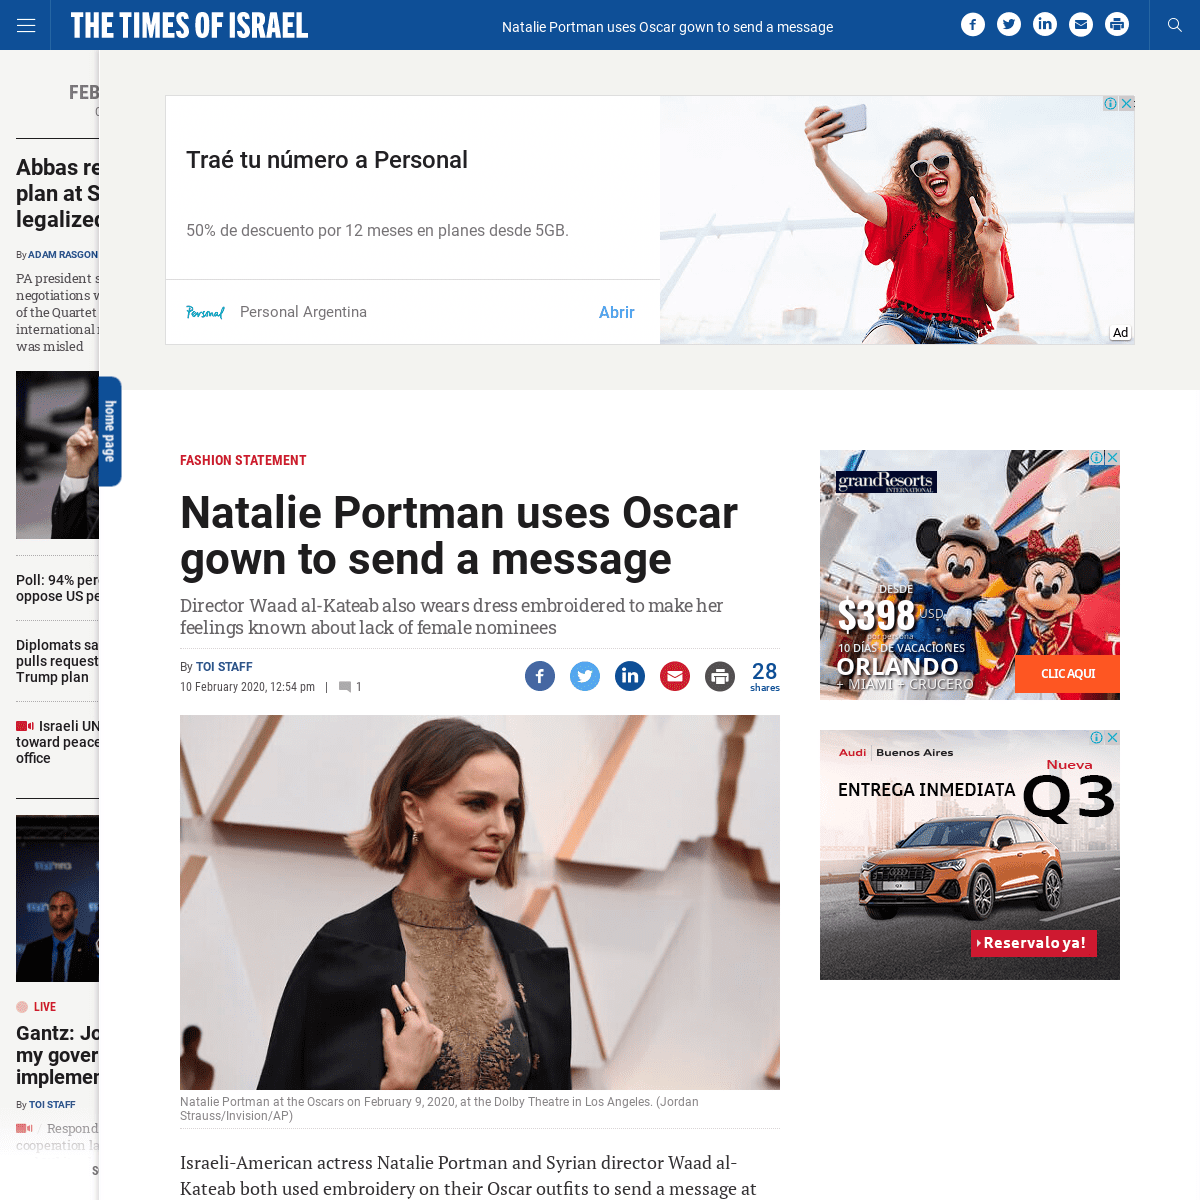 A complete backup of www.timesofisrael.com/natalie-portman-uses-oscar-gown-to-send-a-message/